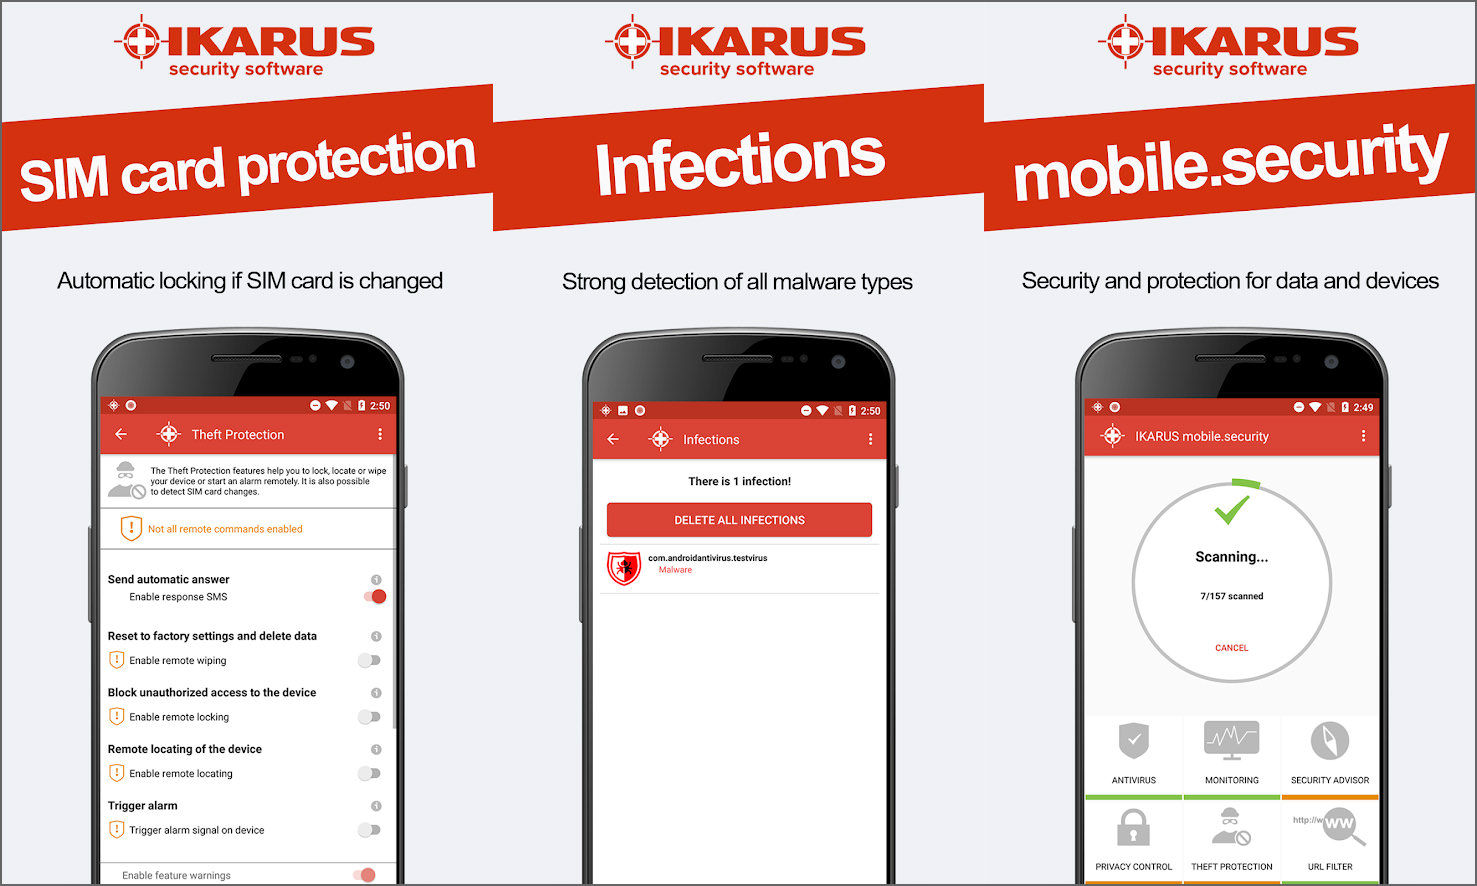 IKARUS mobile.security (1 Year / 1 Device)